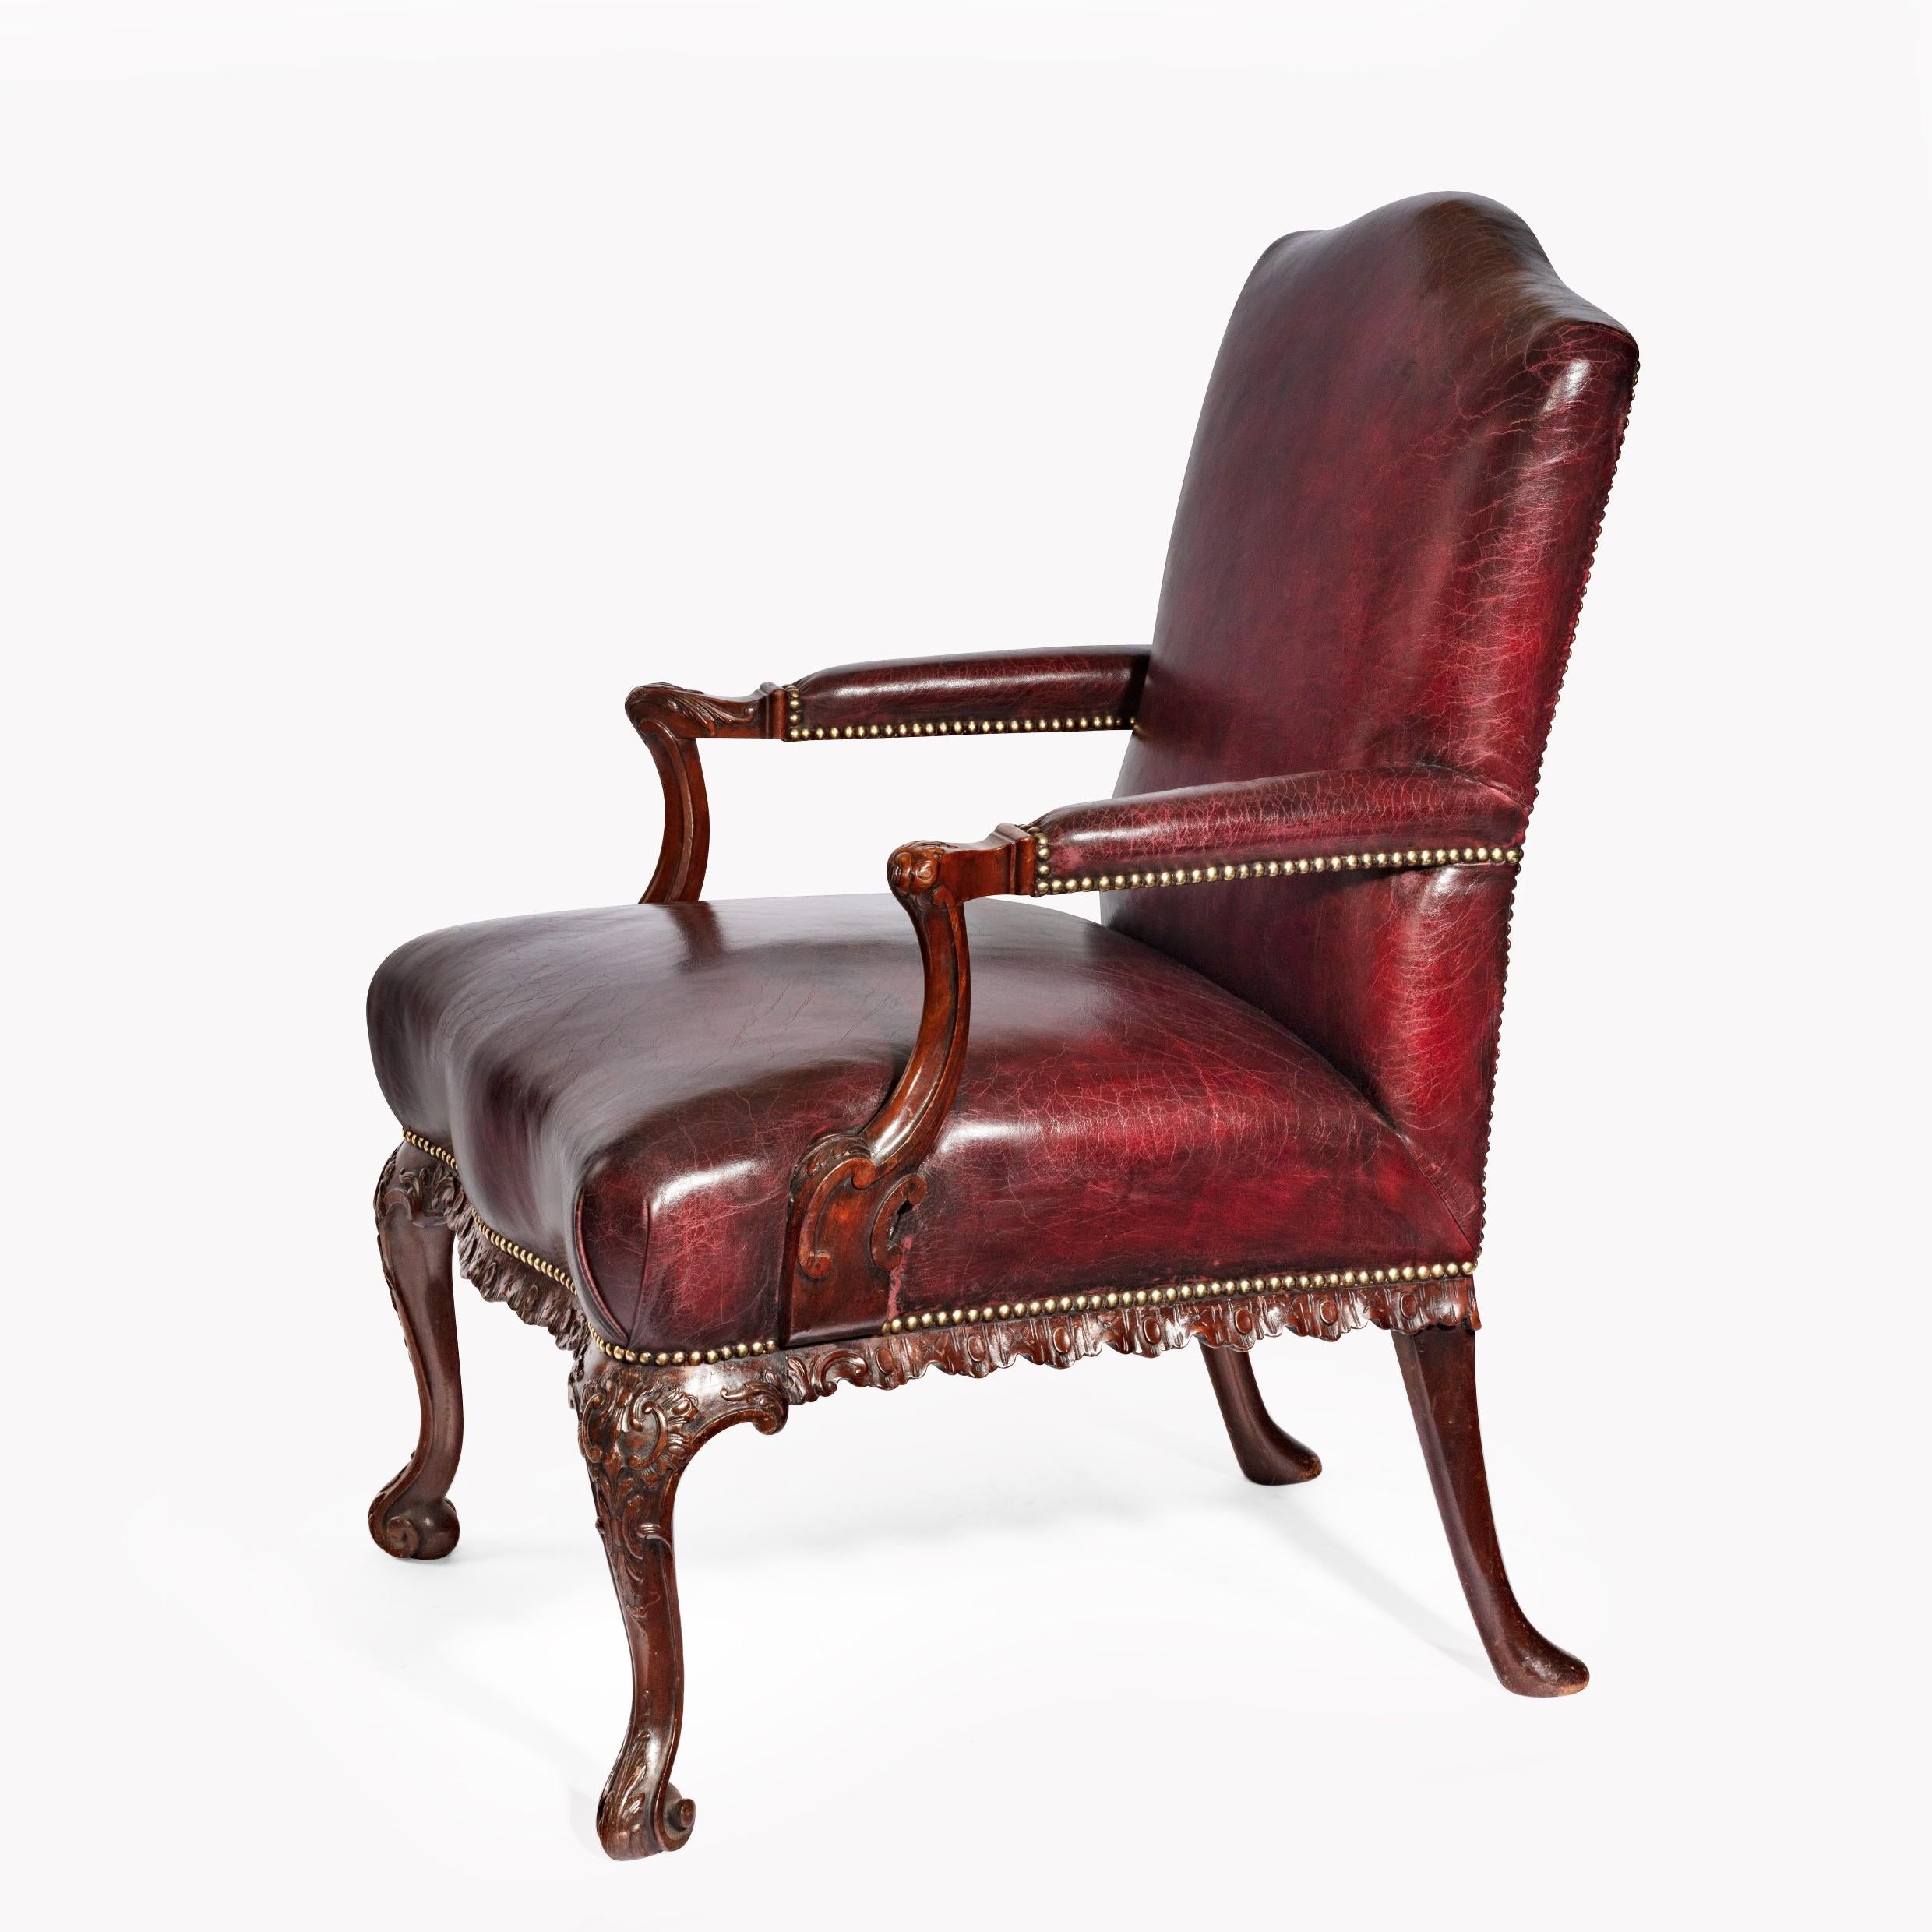 Early 20th Century Late Victorian Mahogany Open Arm Chairs in the Chippendale Taste For Sale